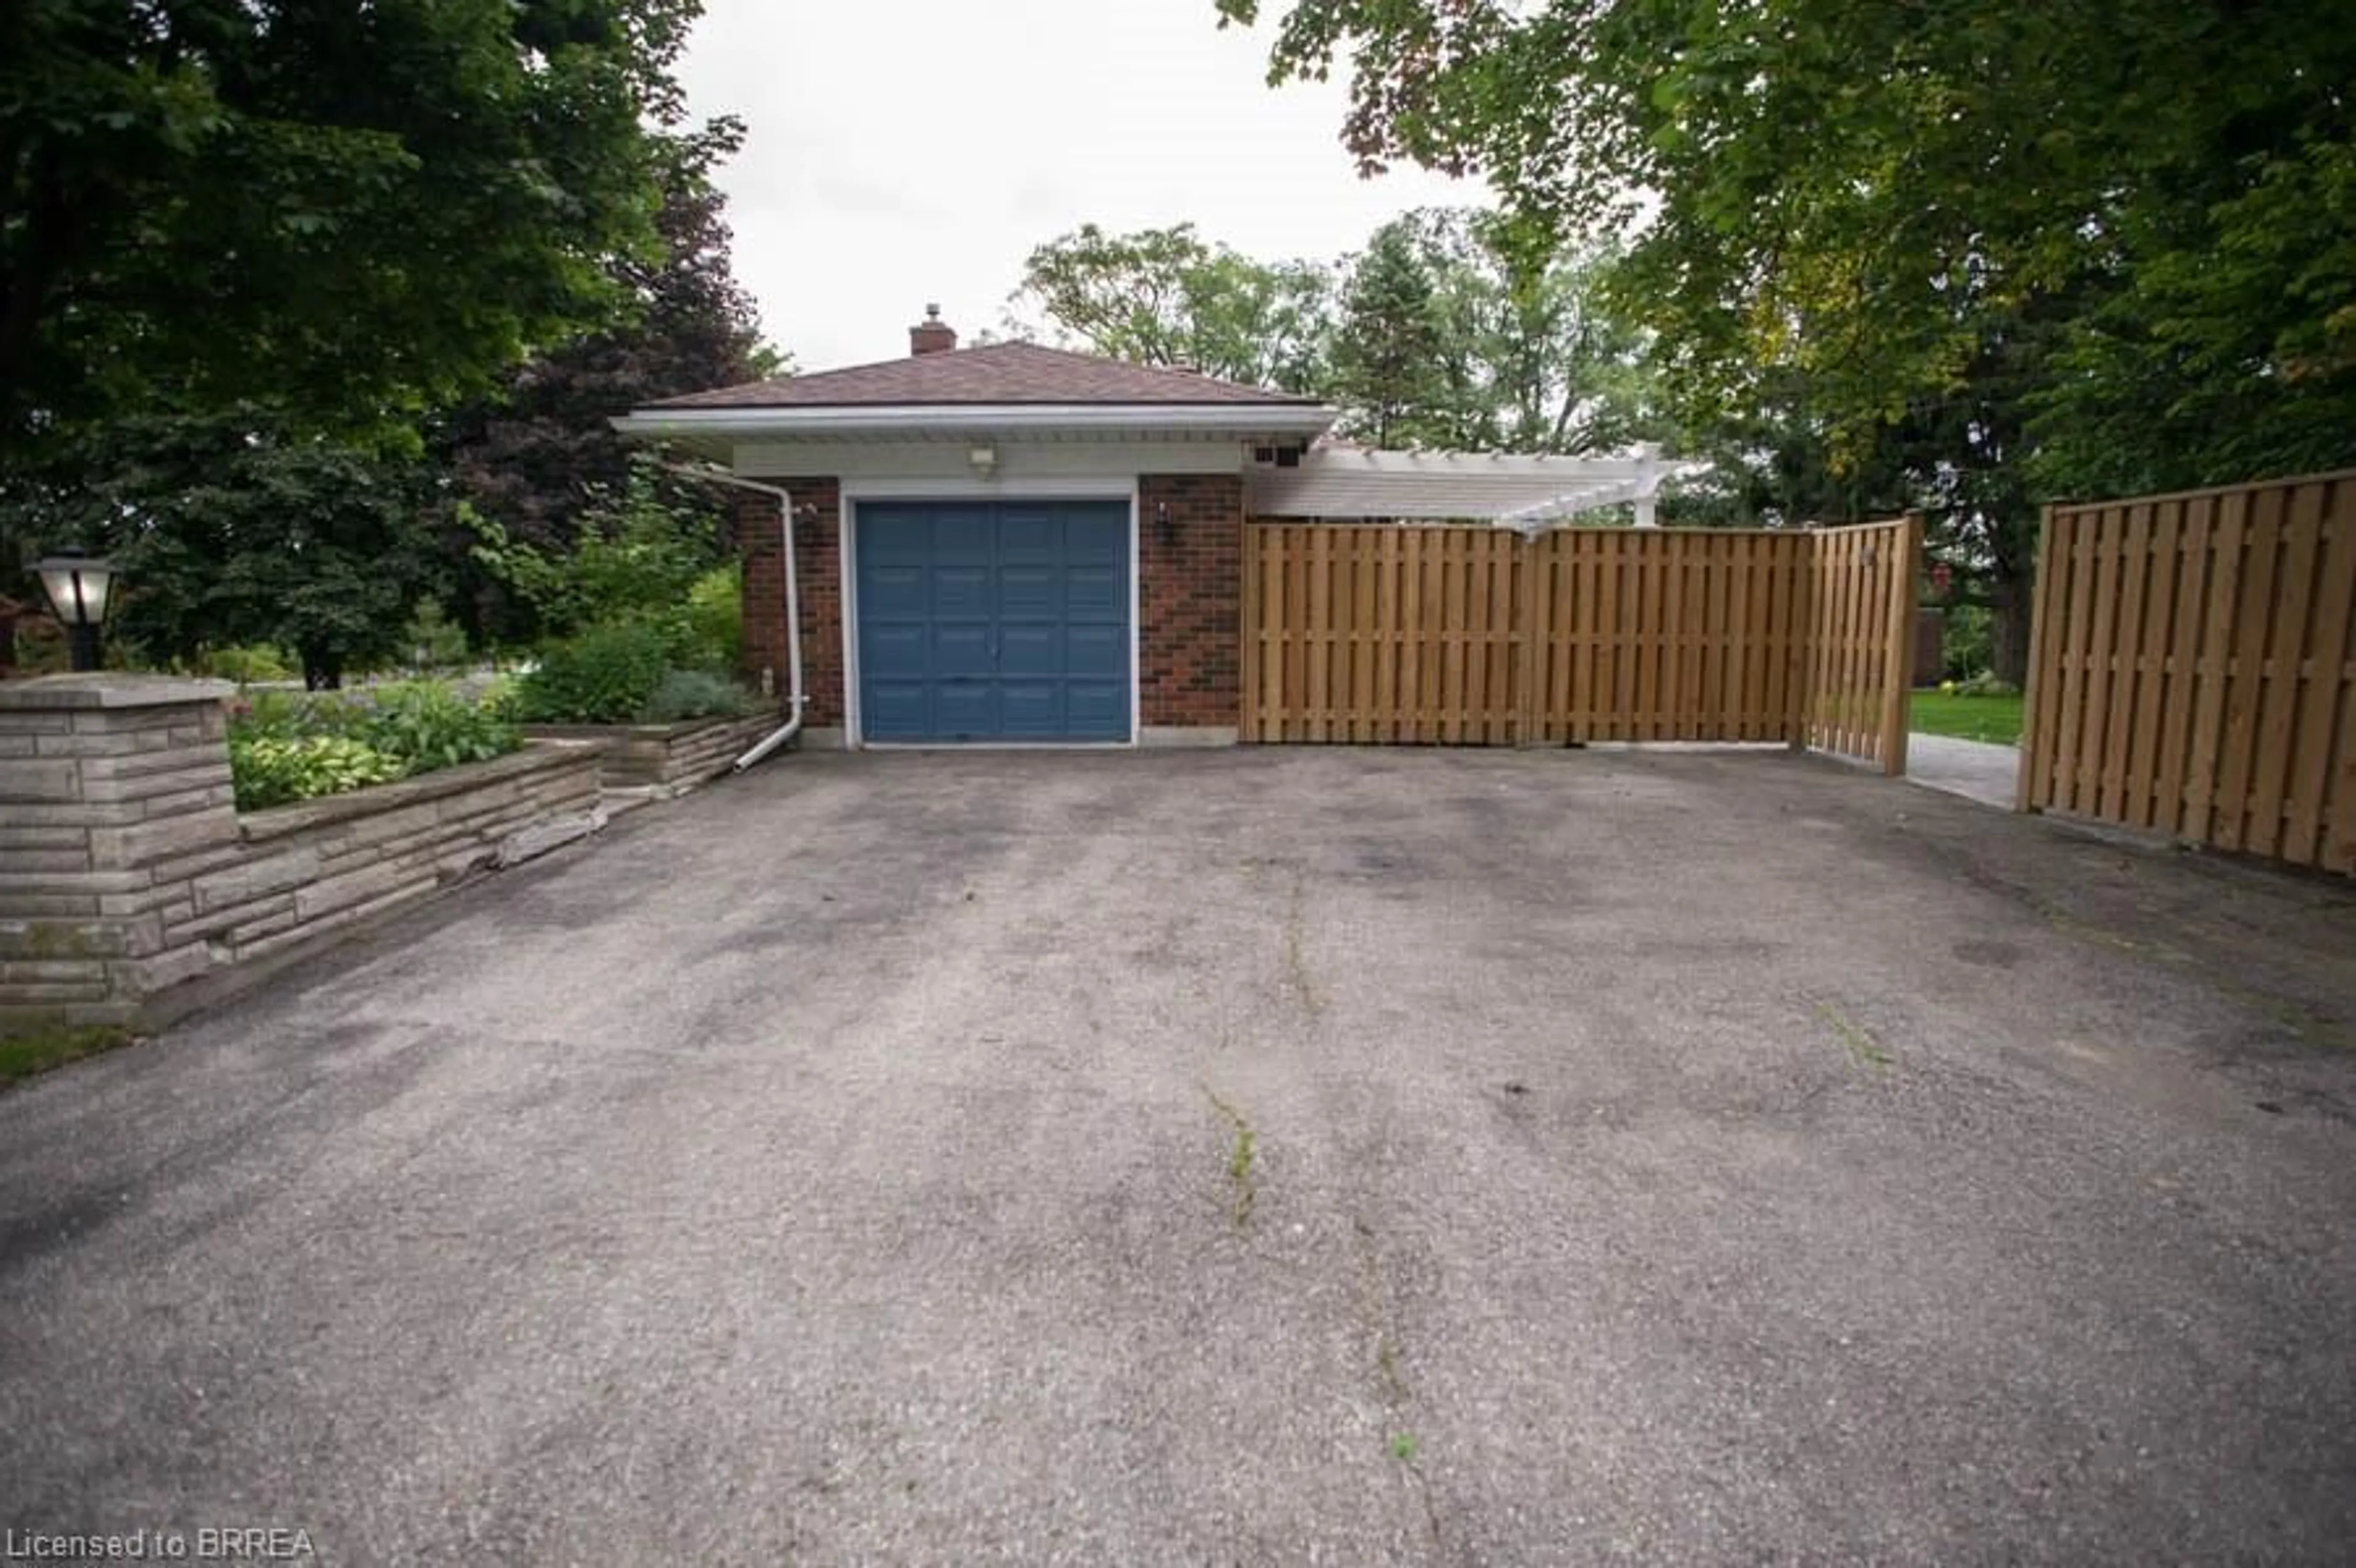 Shed for 111 Tutela Heights Rd, Brantford Ontario N3T 1A5